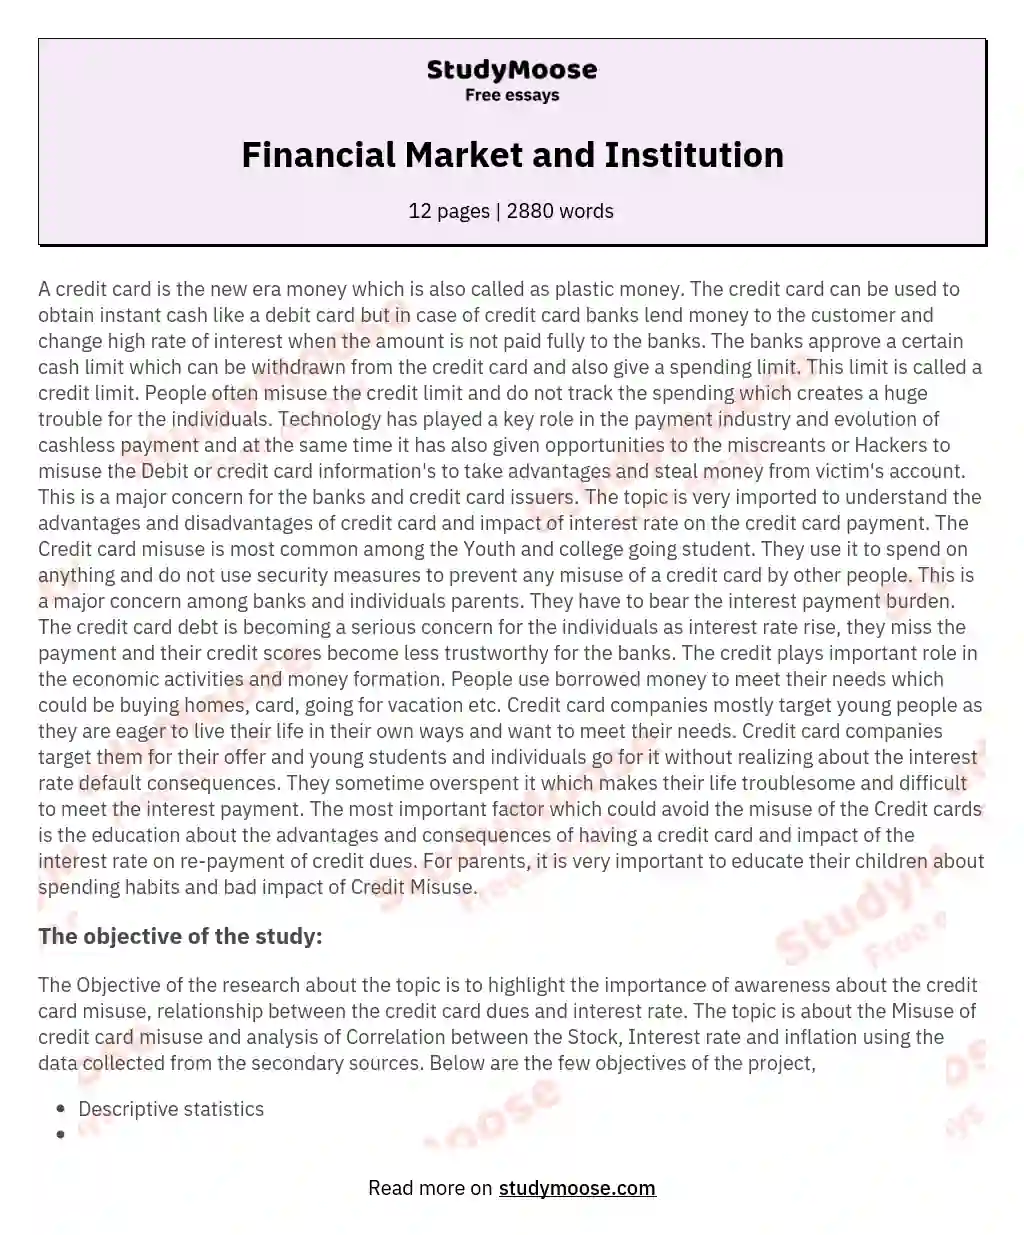 Financial Market and Institution essay